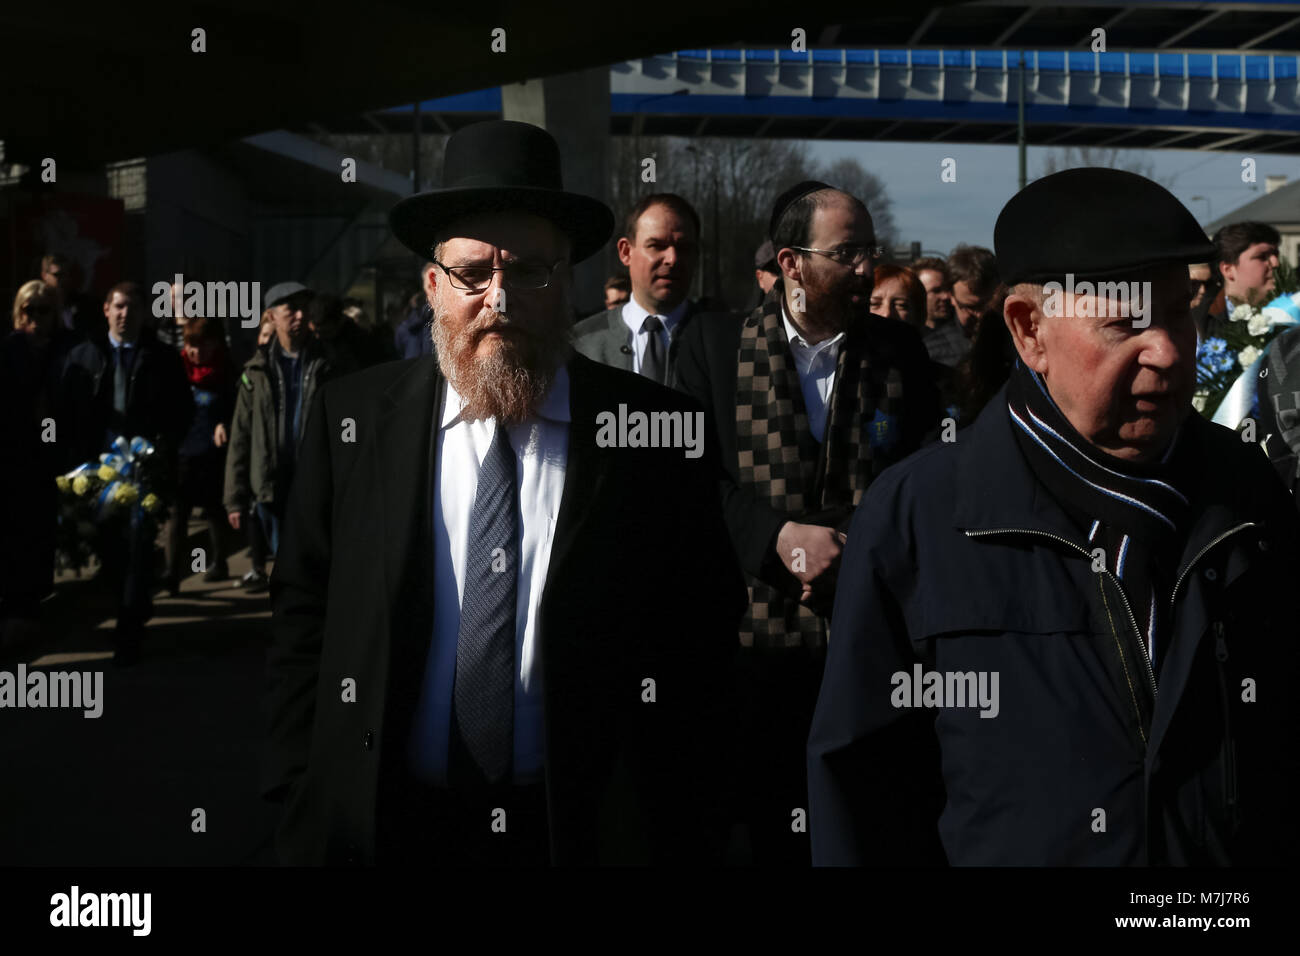 Krakow, Poland, Poland. 11th March, 2018. The Rabbi is visible in the beam of light during the March of Remembrance. Credit: Filip Radwanski/Alamy Live News Stock Photo